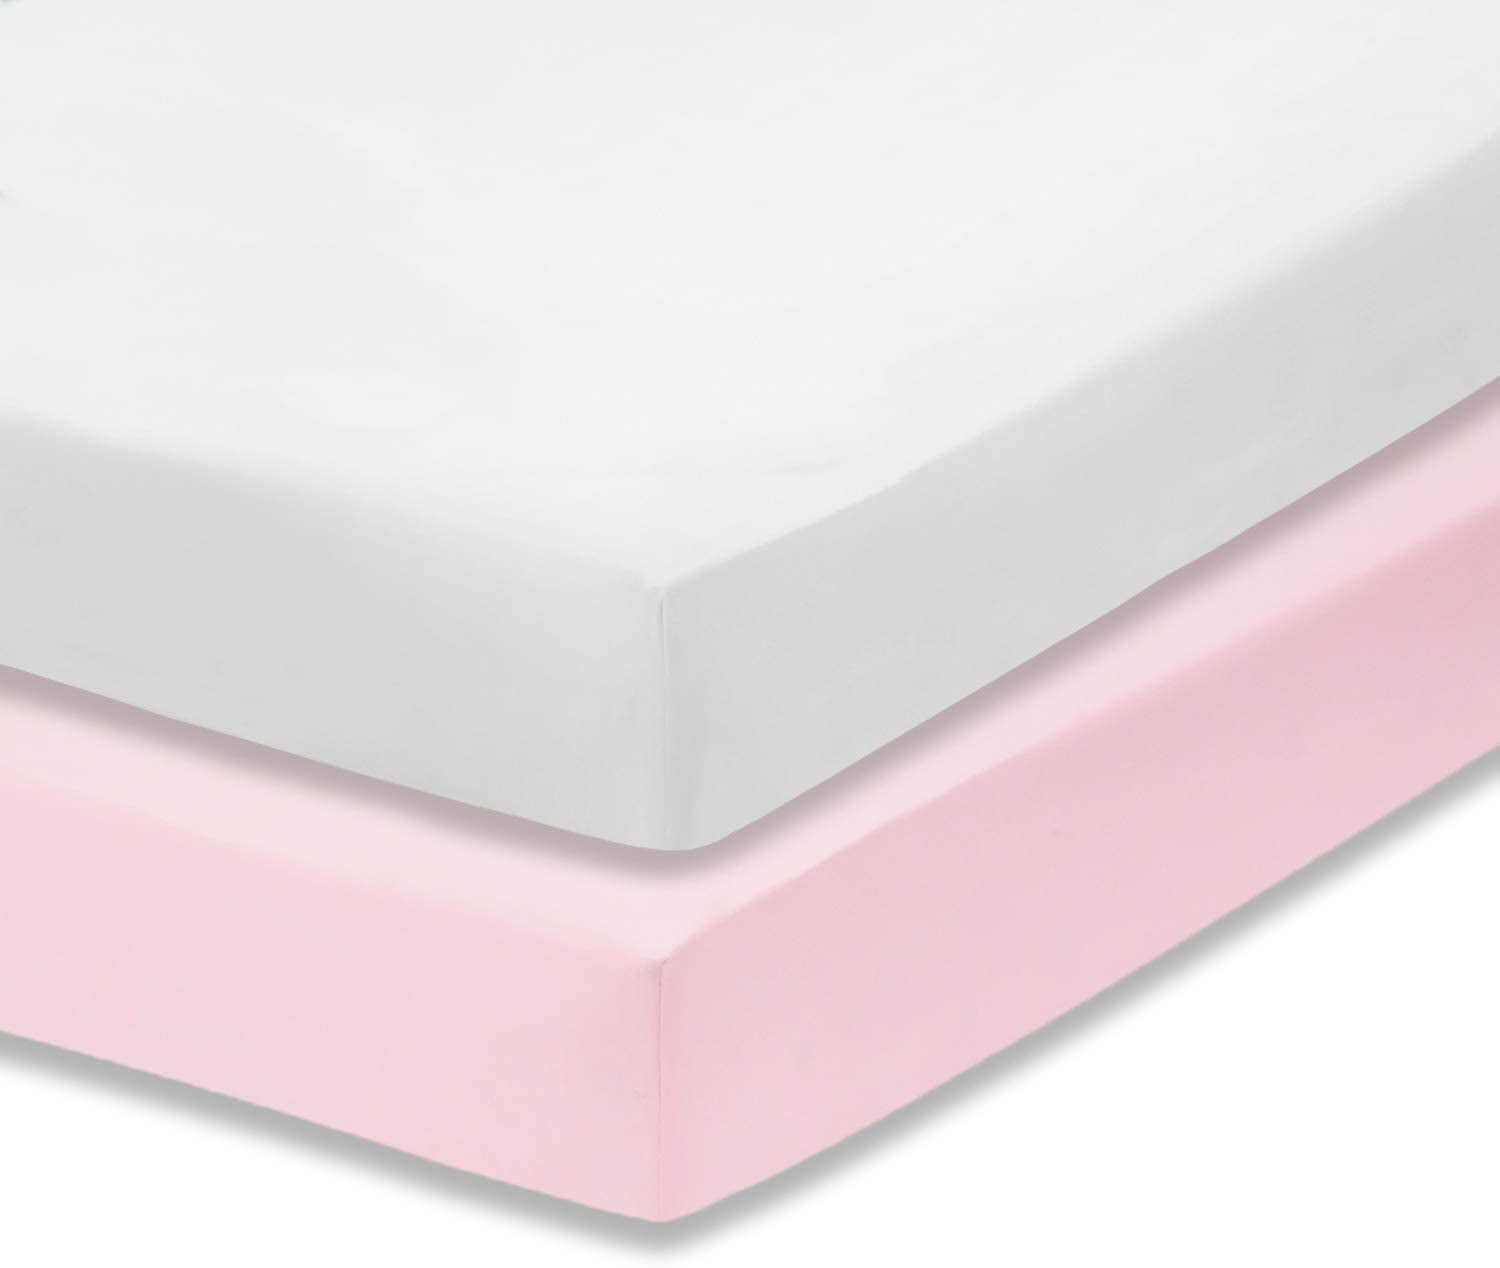 Dudu N Girlie - Cot Bed Sheets 140 x 70 Fitted - Jersey Cotton Hypoallergenic Cot Bed Bedding Fully Elasticated Skirt Breathable Easy Care - (Pack of 2, White & Pink)